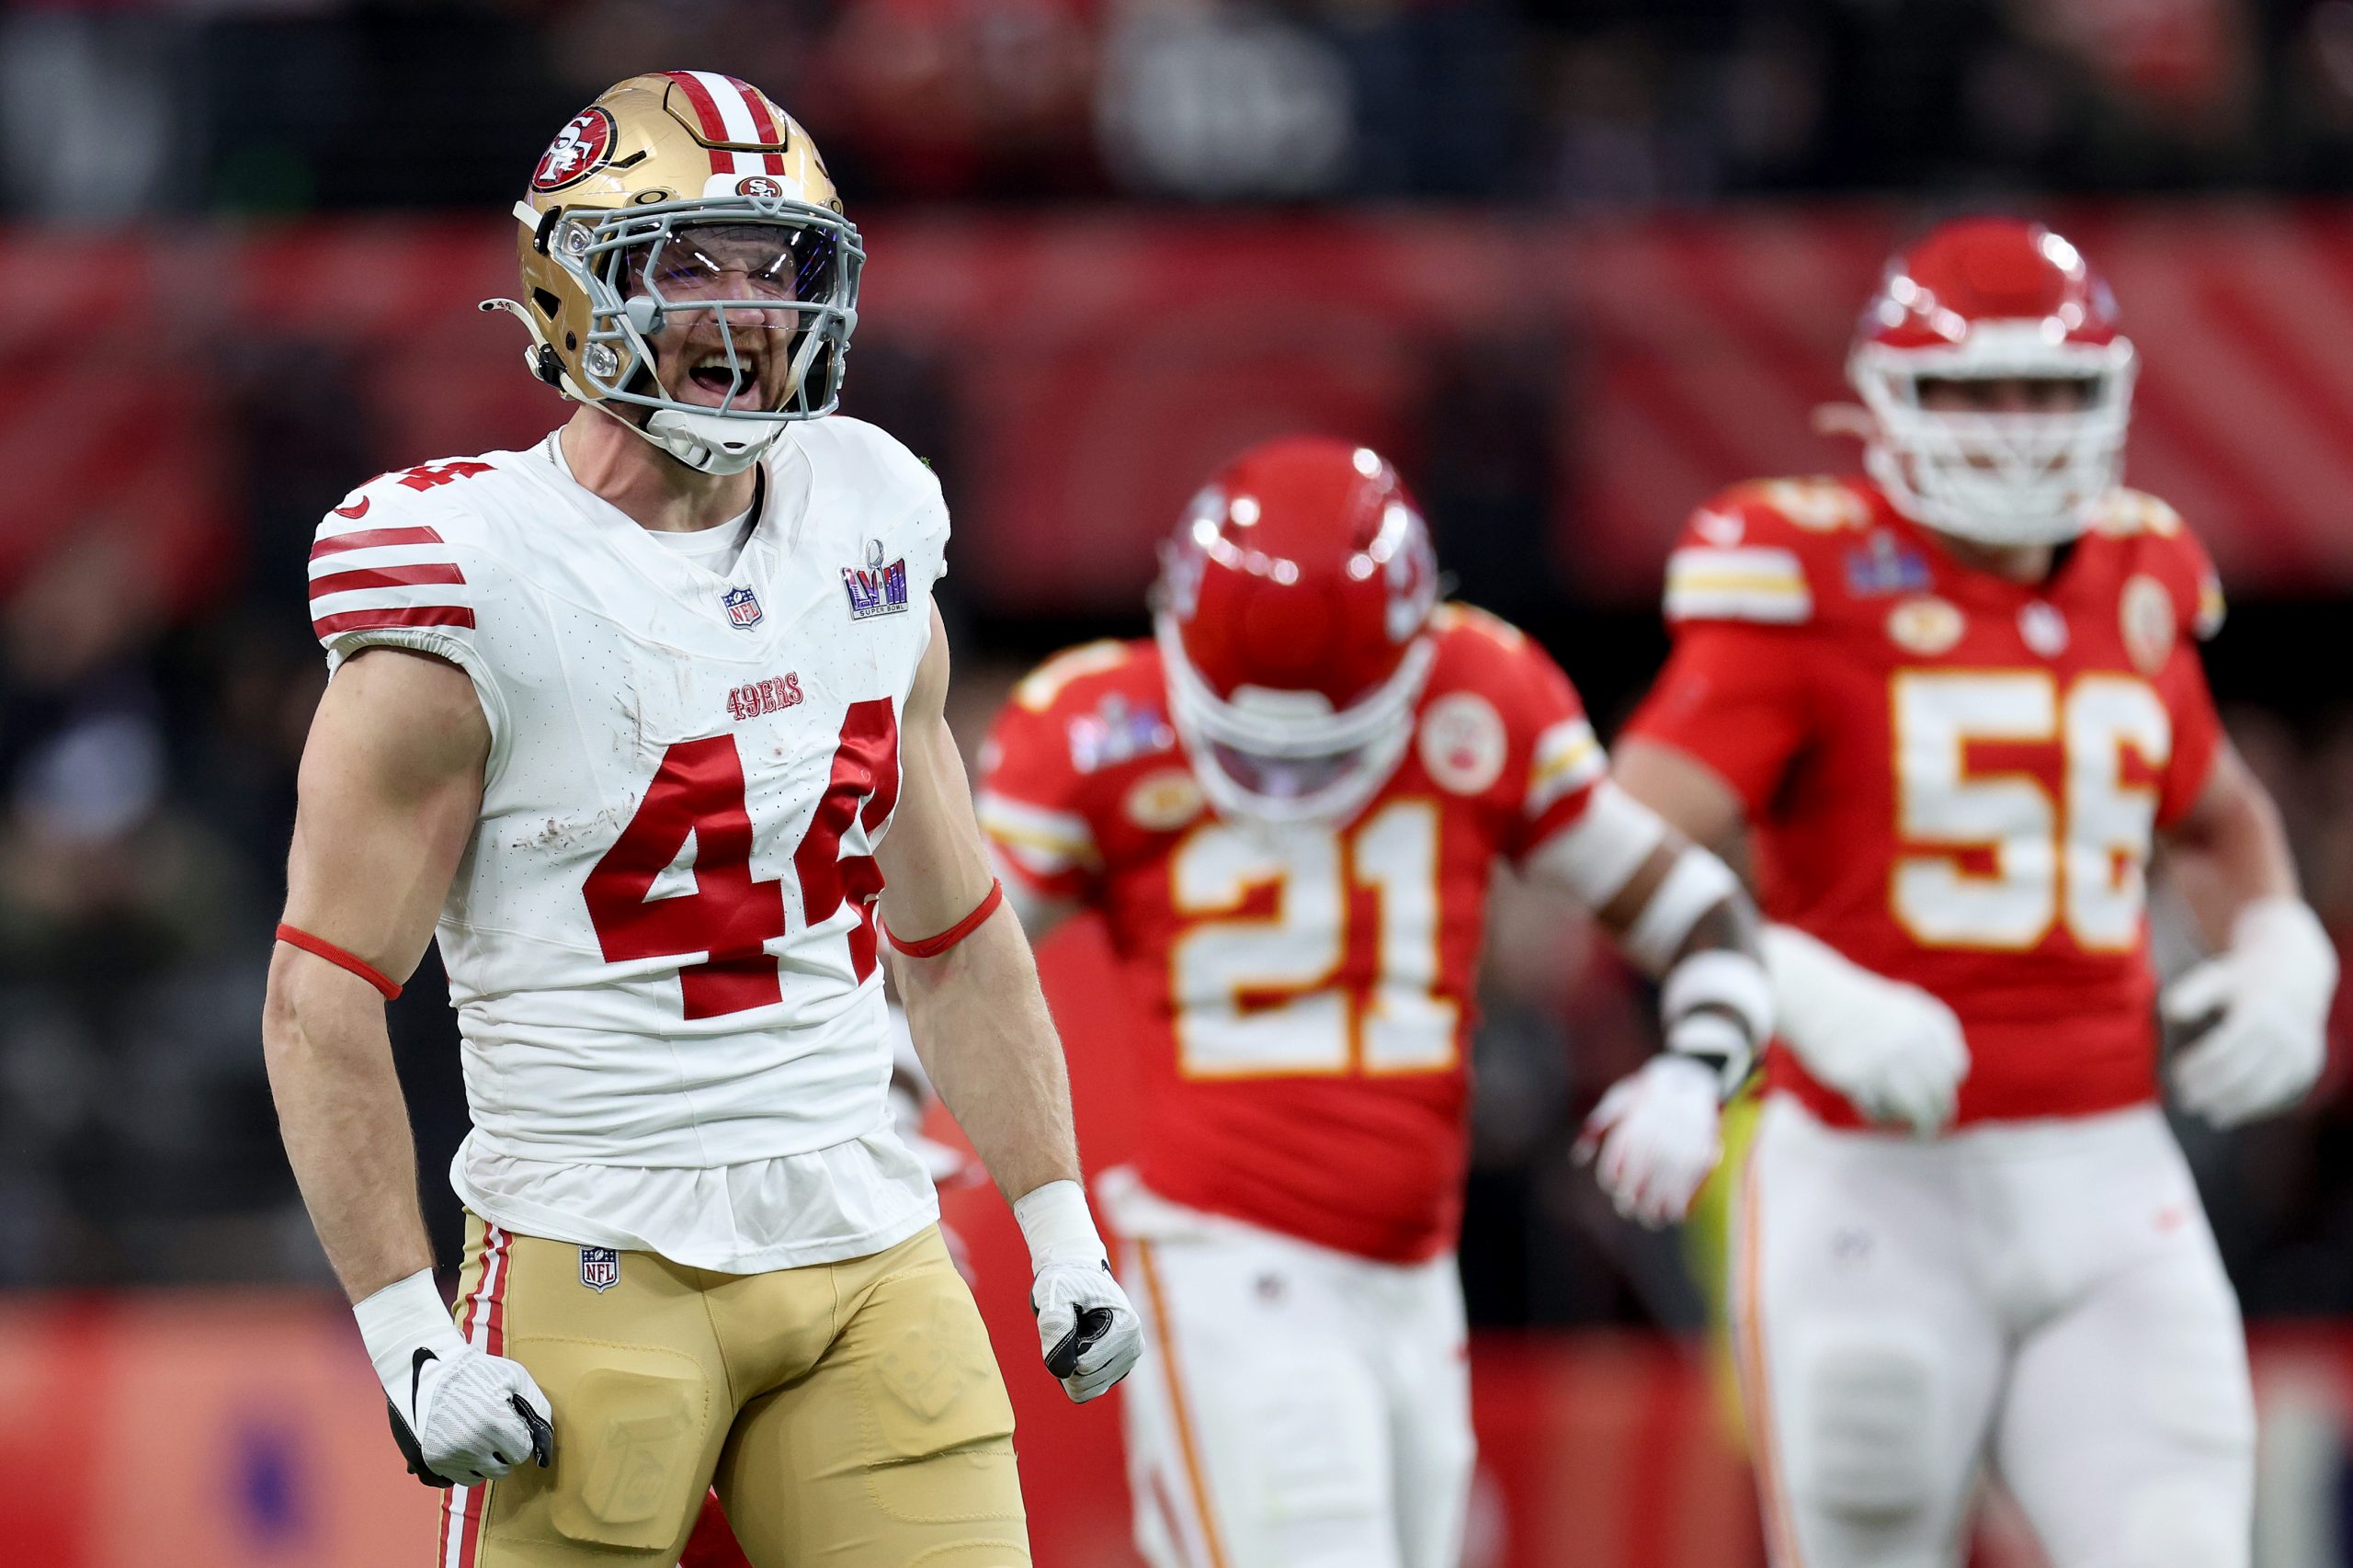 Reports: Kyle Juszczyk agrees to contract restructure with 49ers